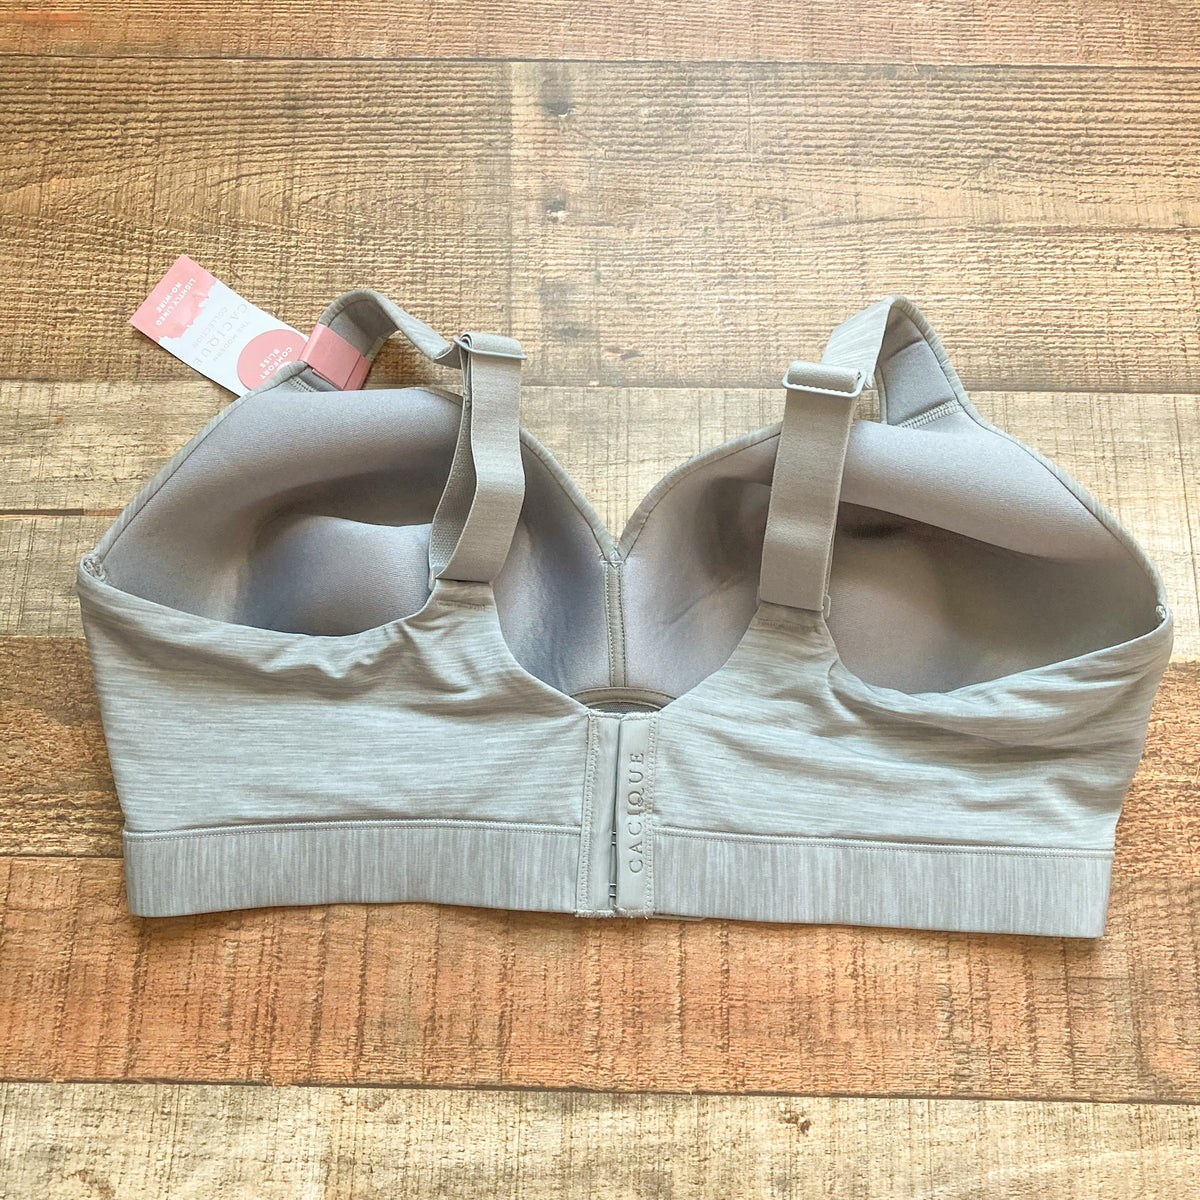 Cacique Gray Heather No-Wire Bra NWT- Size 38D – The Saved Collection